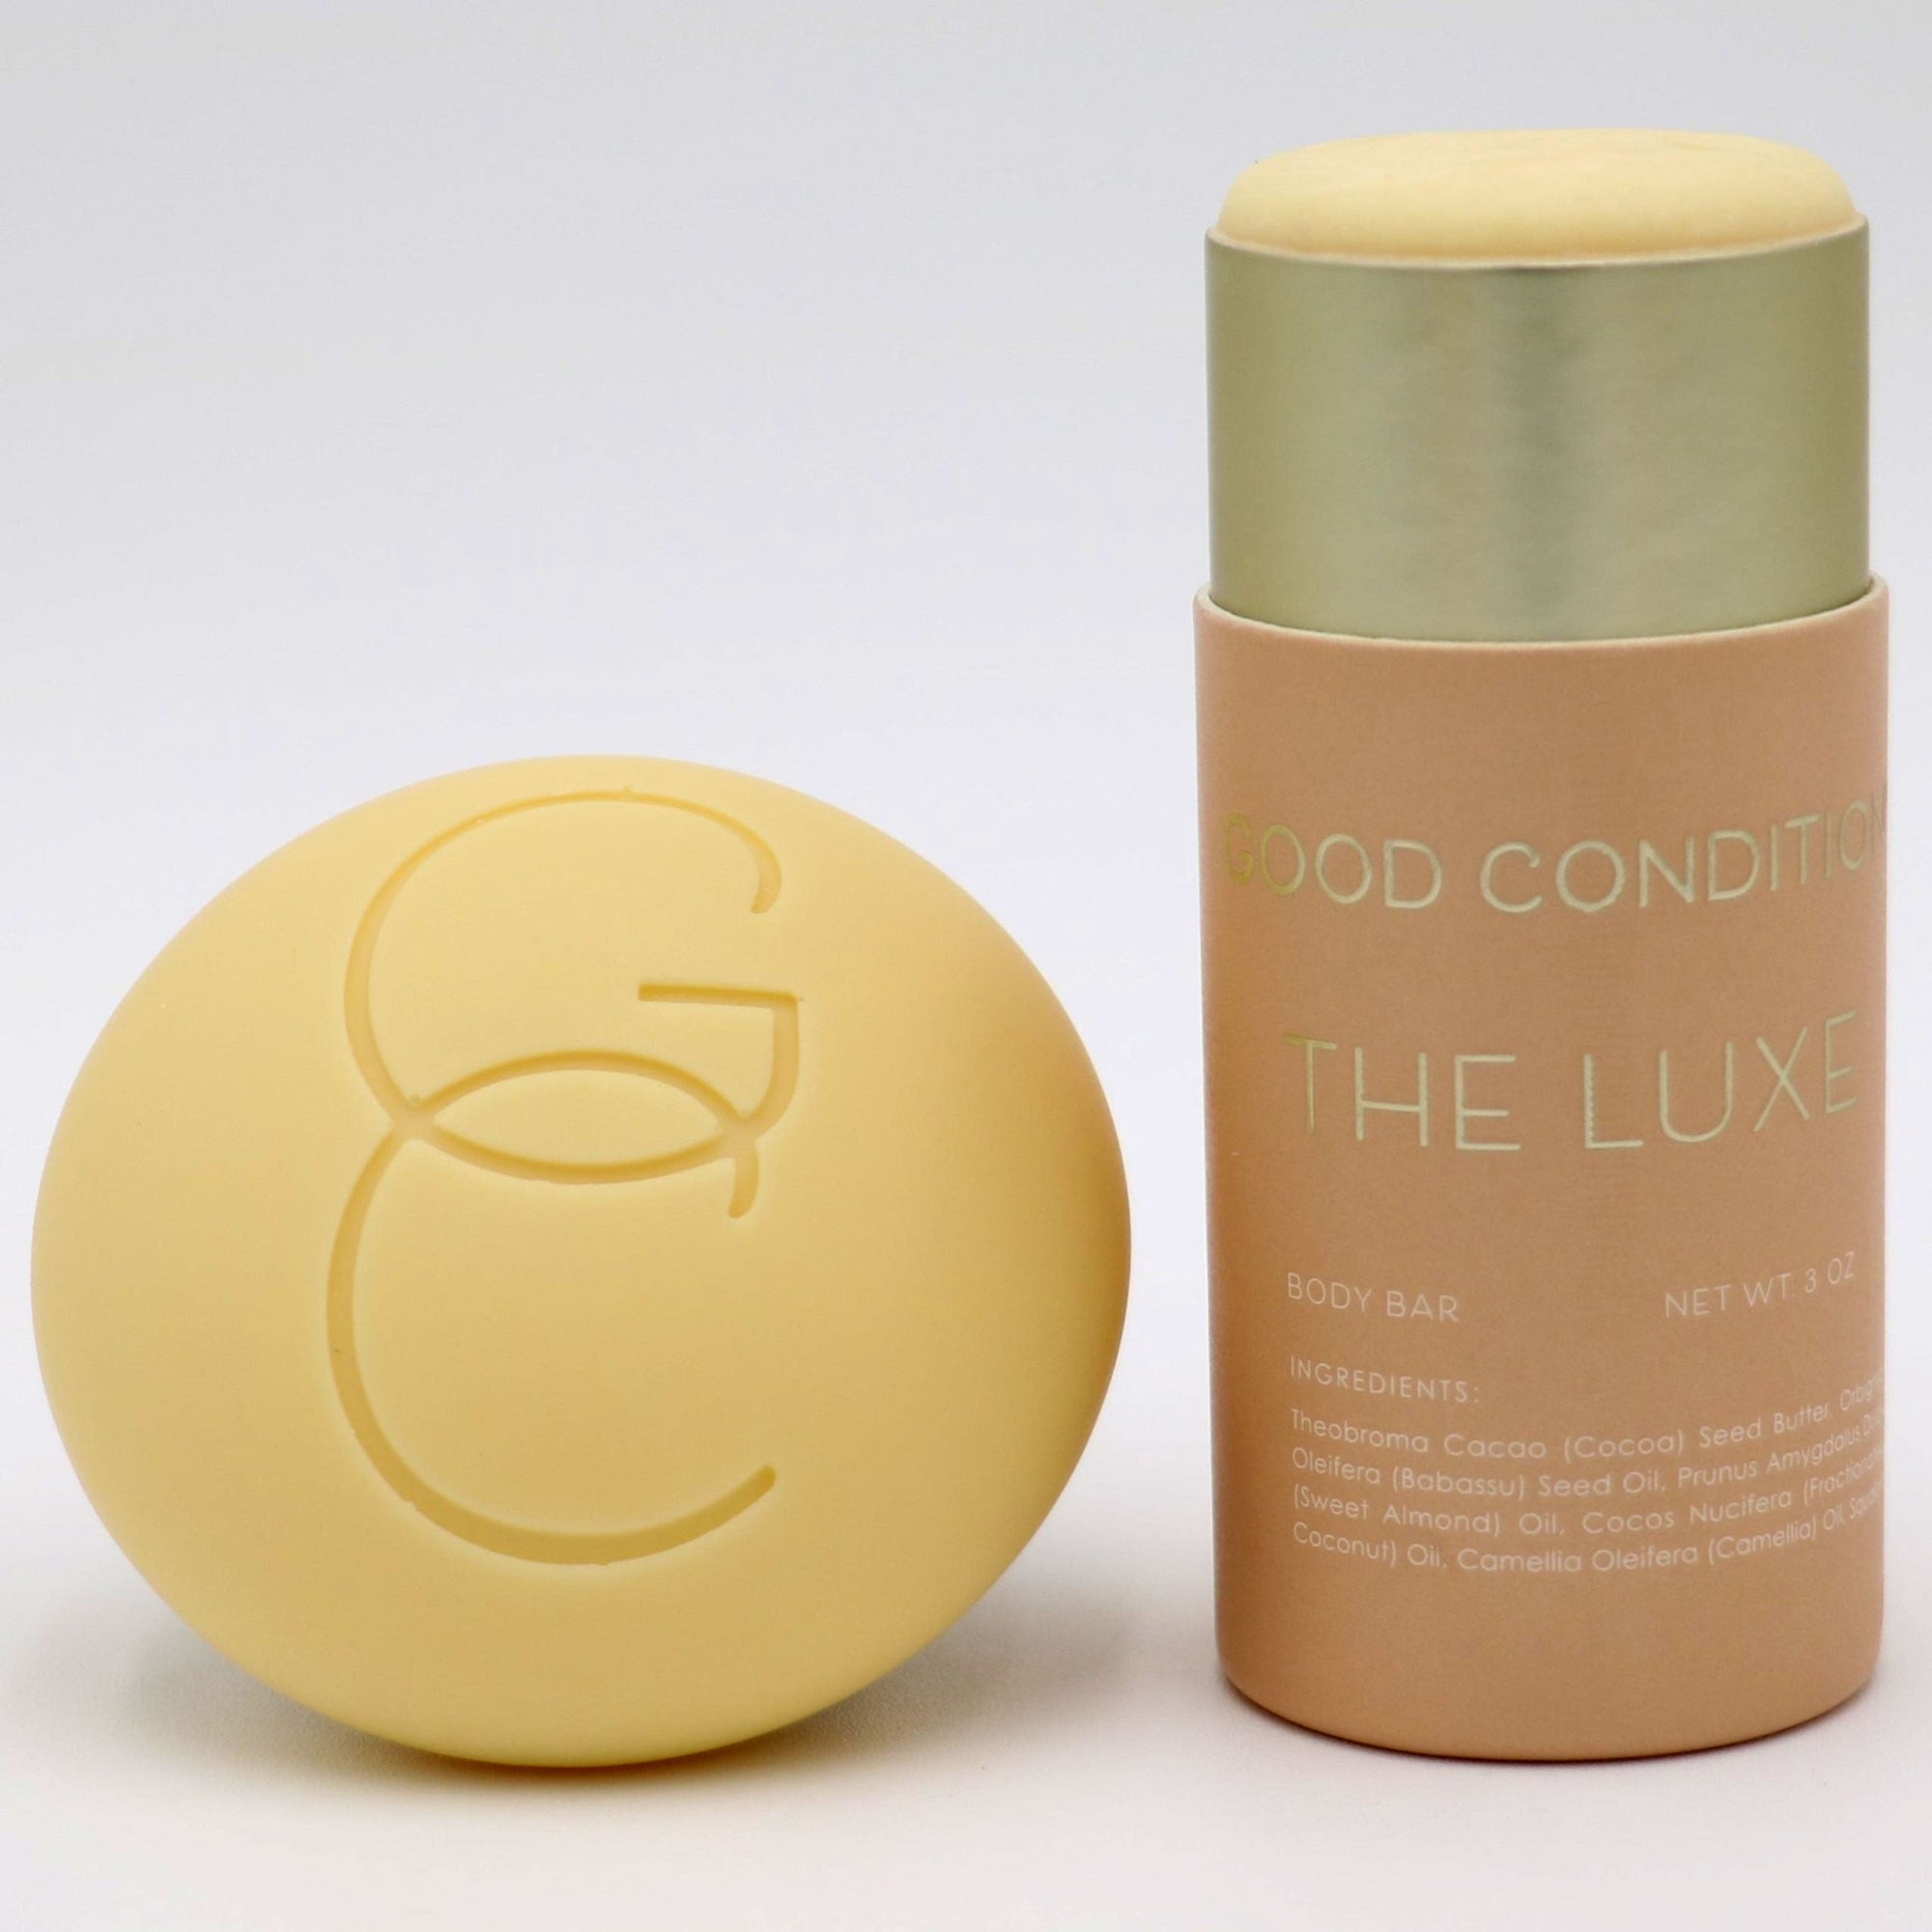 Good Condition The Luxe organic cocoa butter lotion bar. Made with vitamin e rich babassu seed oil, camellia seed oil to fight free radical damage, moisturize and condition skin, and squalane to restore suppleness and help neutralize damage caused by UV light. Apply morning or night to soothe dryness and combat the signs of aging.